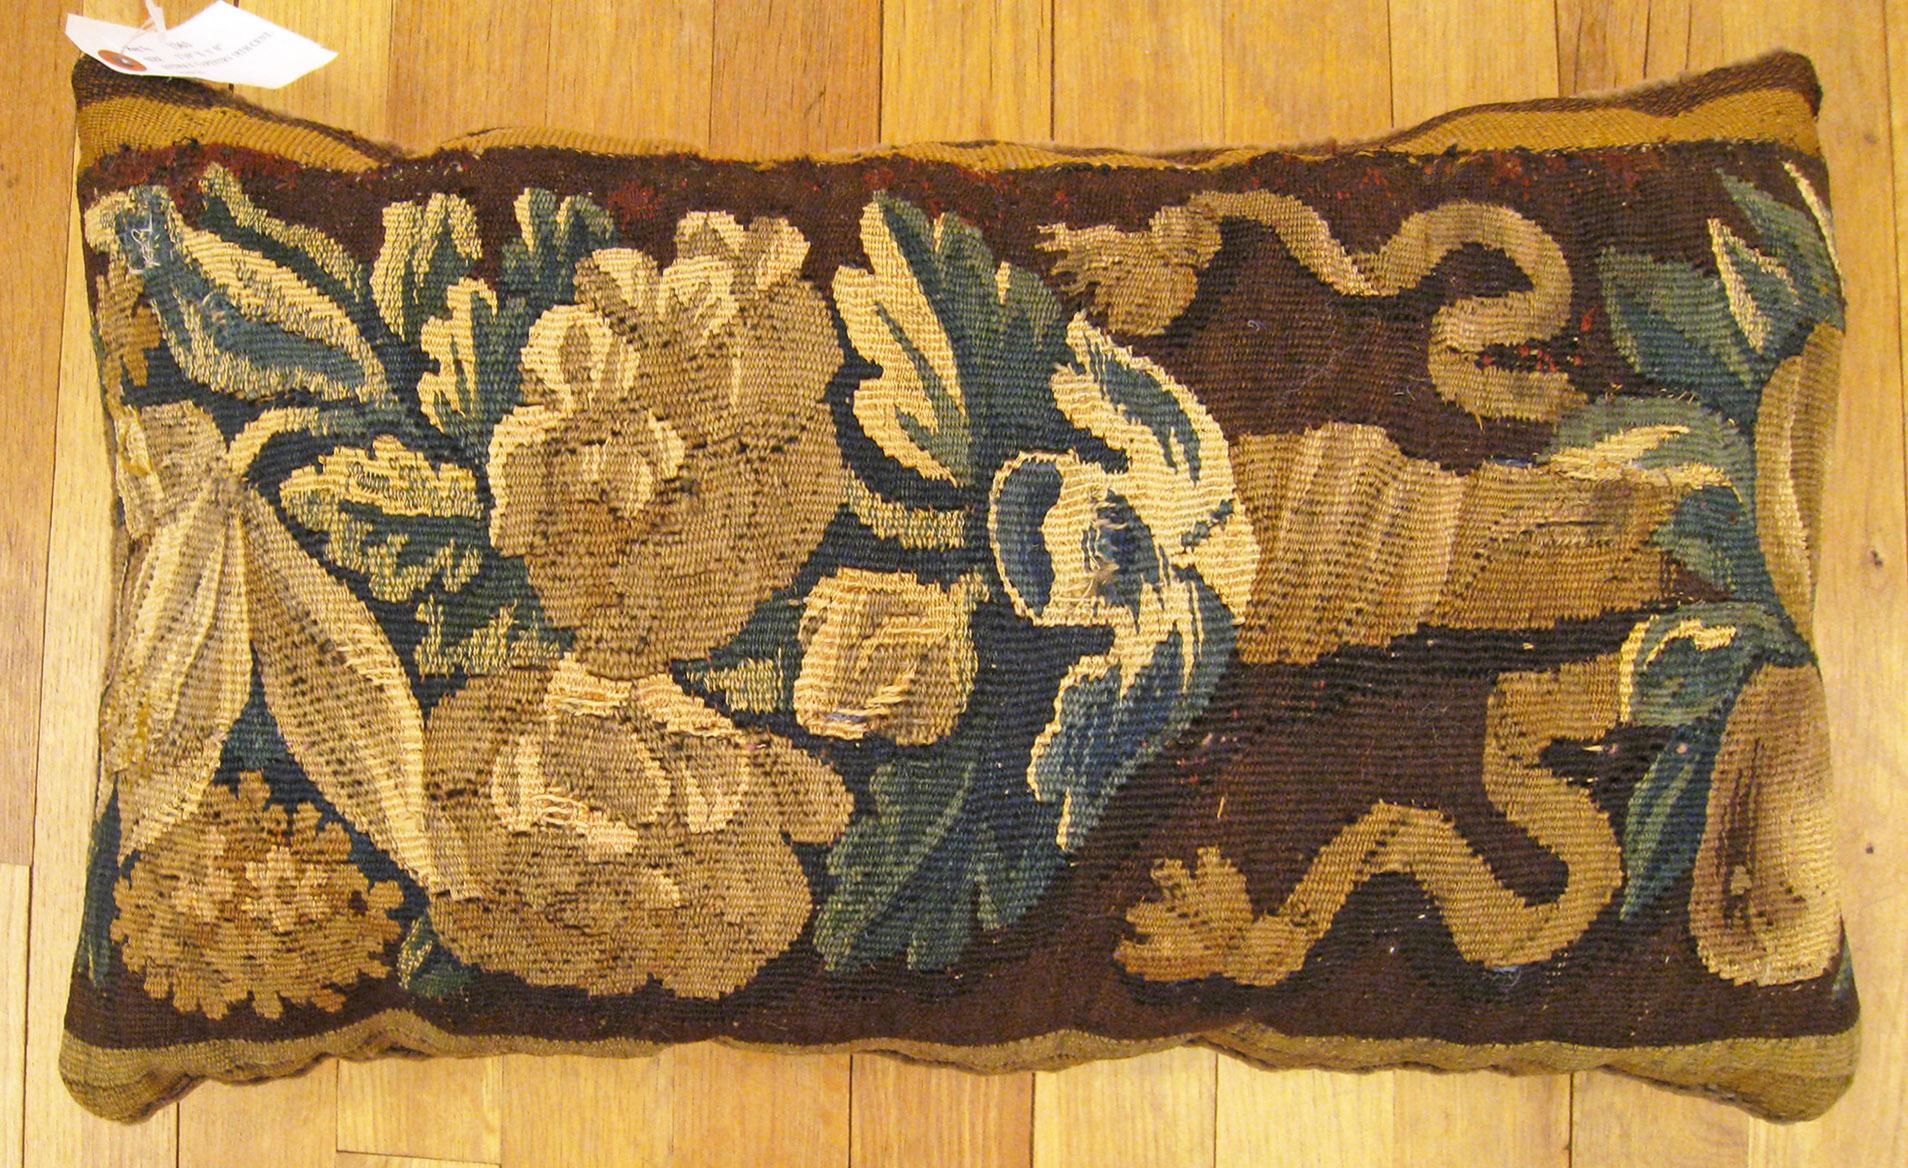 Antique 18th century Tapestry pillow; size 1'0” x 1'10”.

An antique decorative pillow with floral elements allover a brown central field, size 1'0” x 1'10”. This lovely decorative pillow features an antique fabric of a 18th century tapestry on